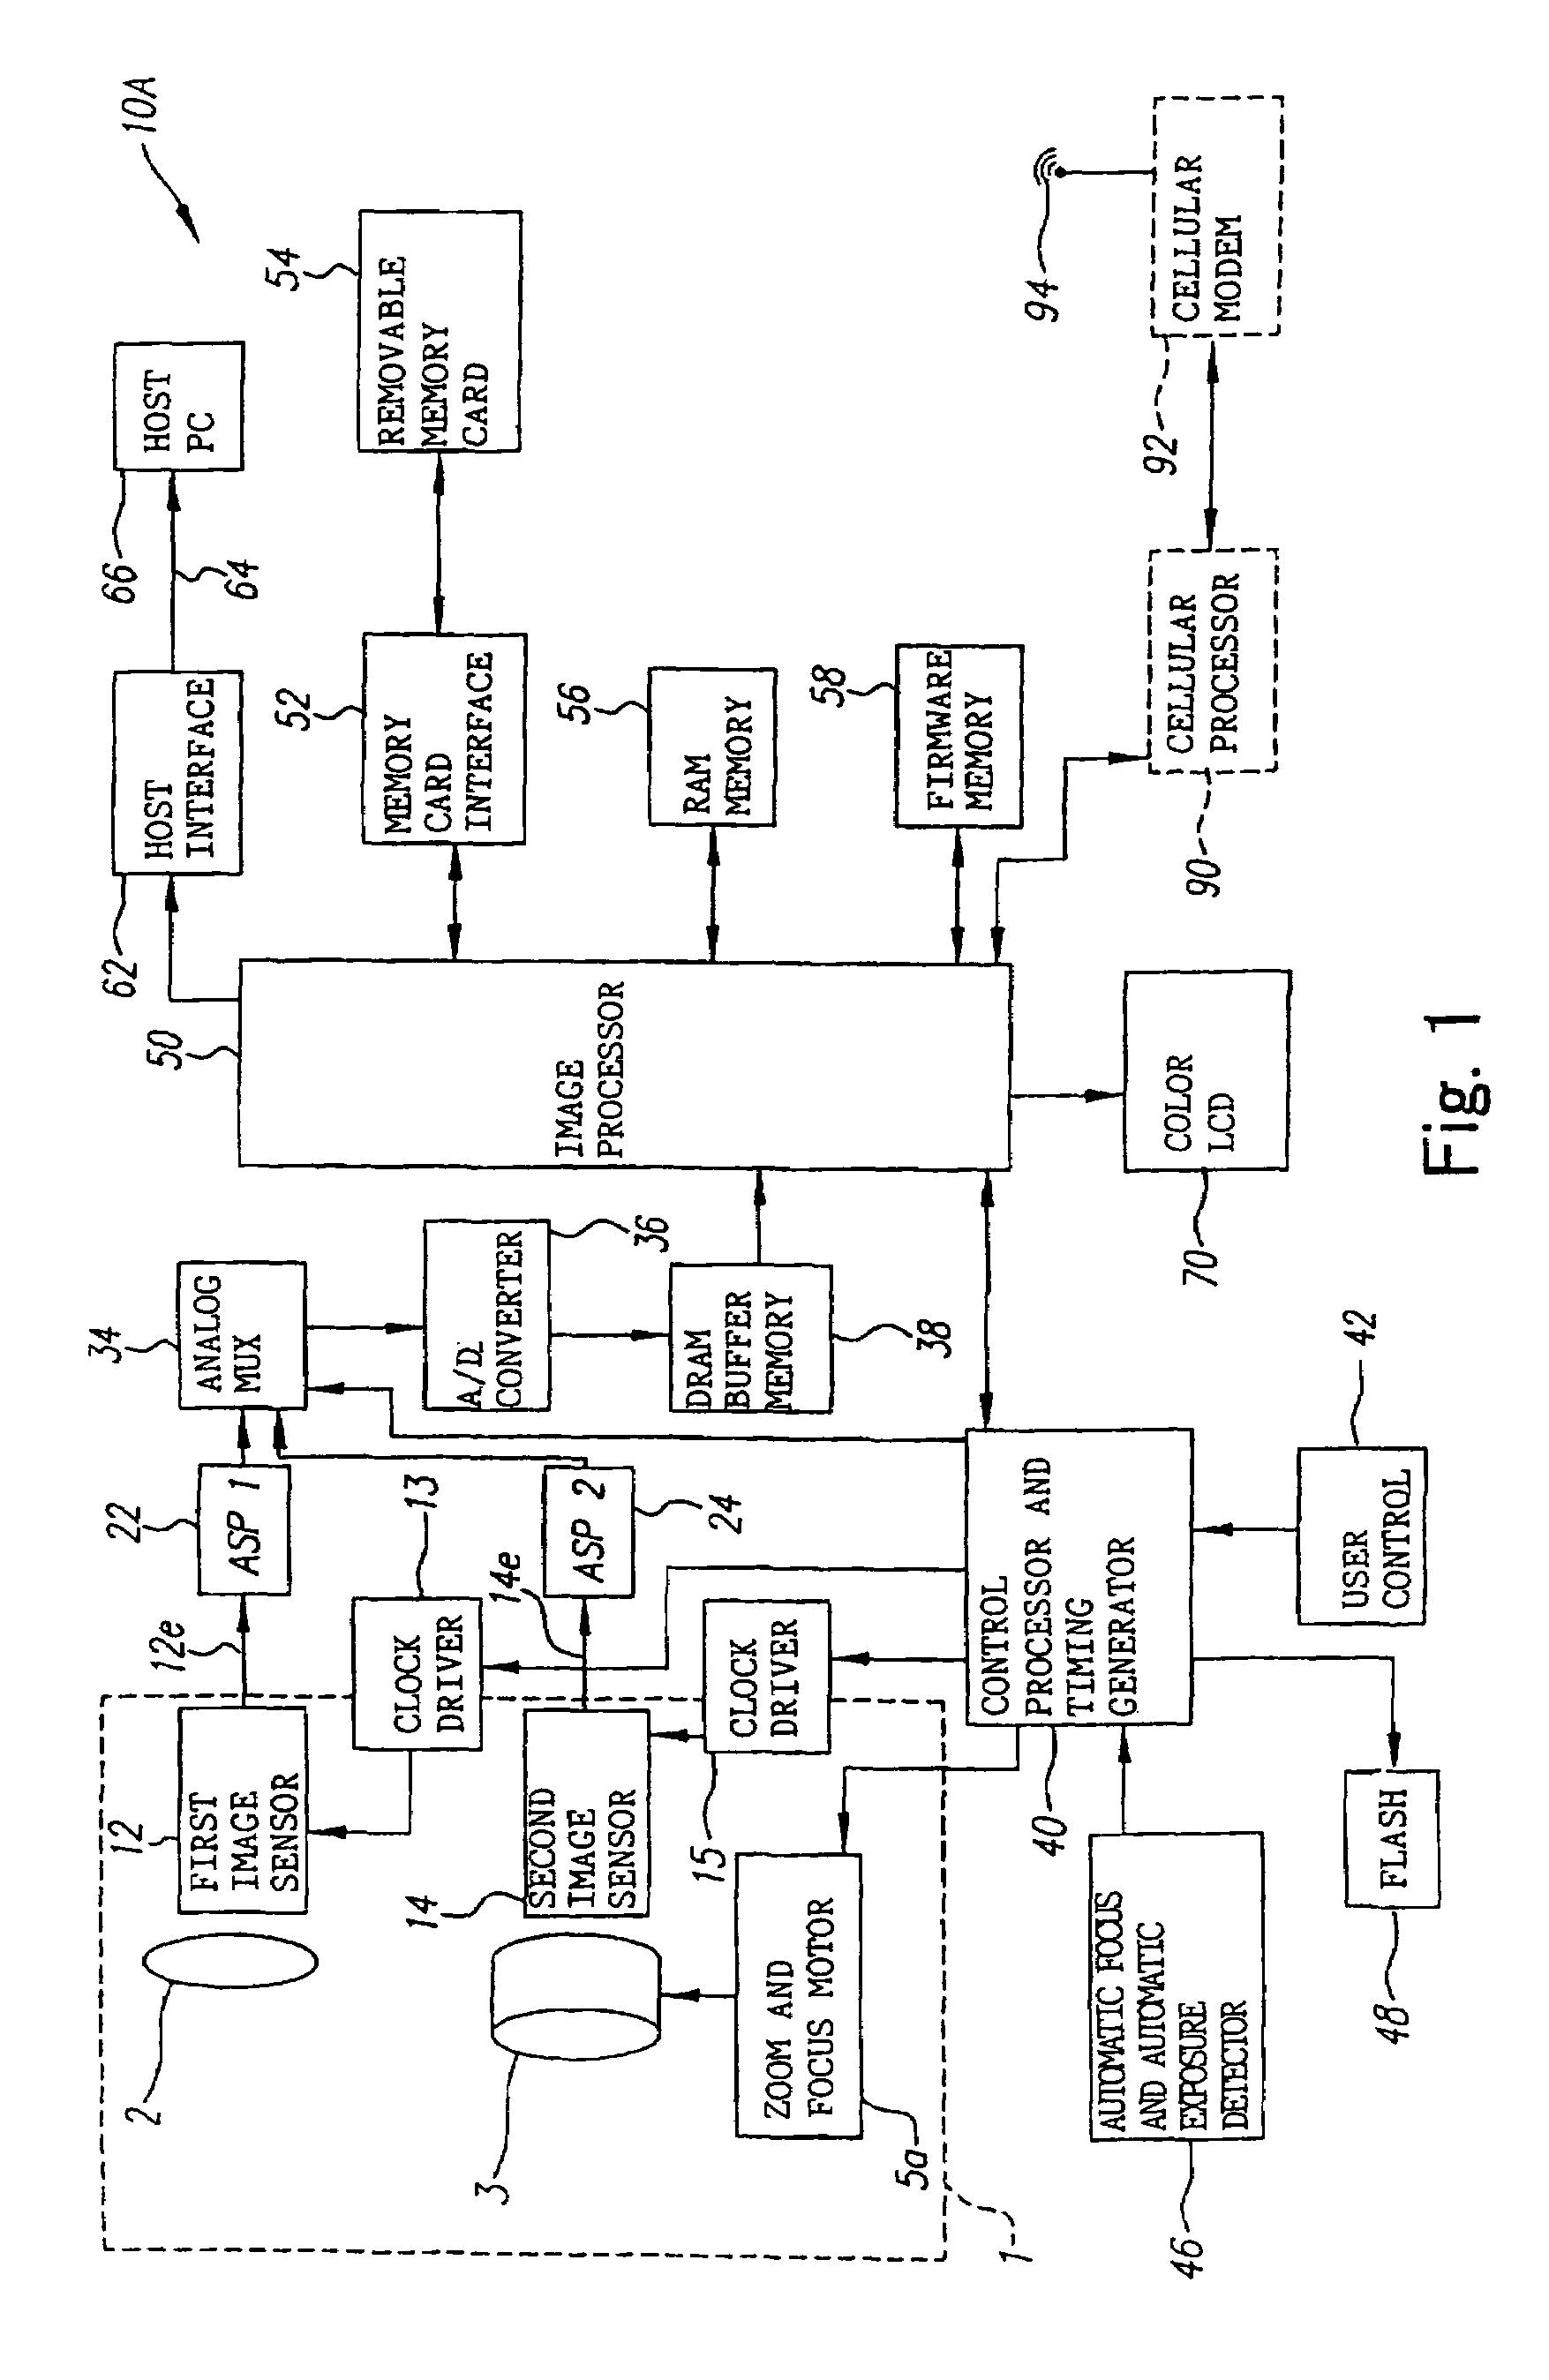 Image-capturing device having multiple optical systems